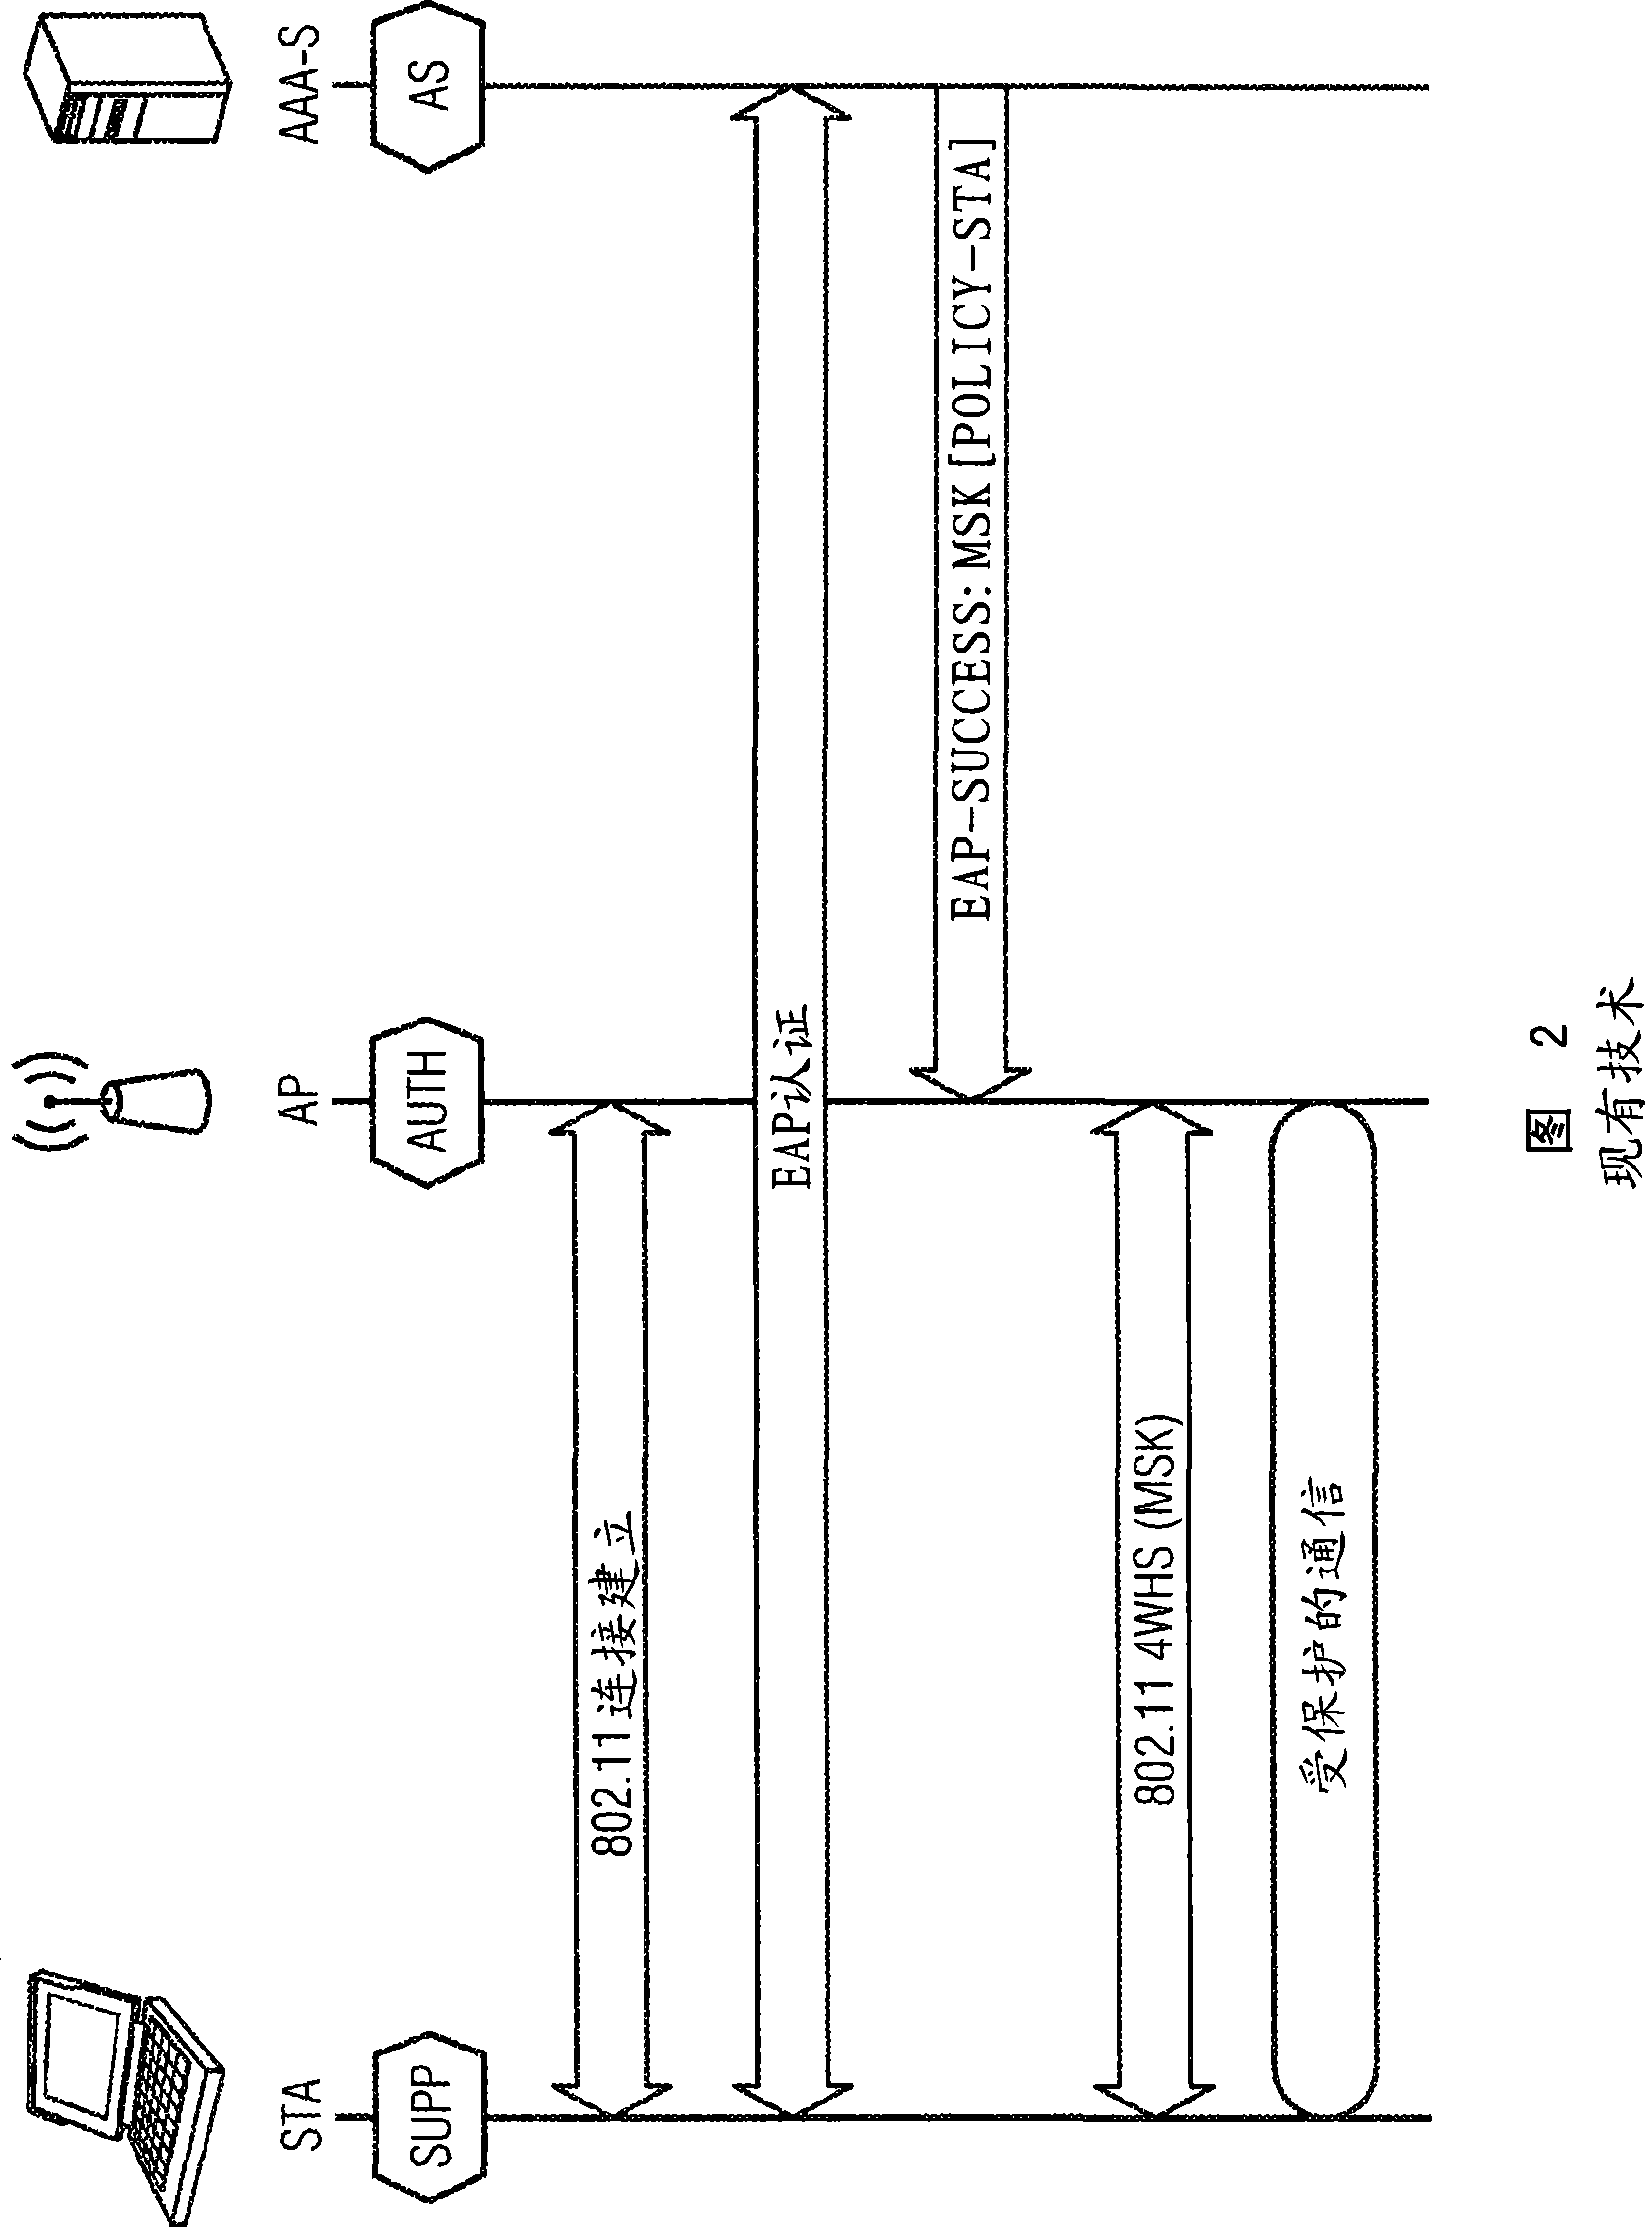 Method and arrangement for the creation of a wireless mesh network